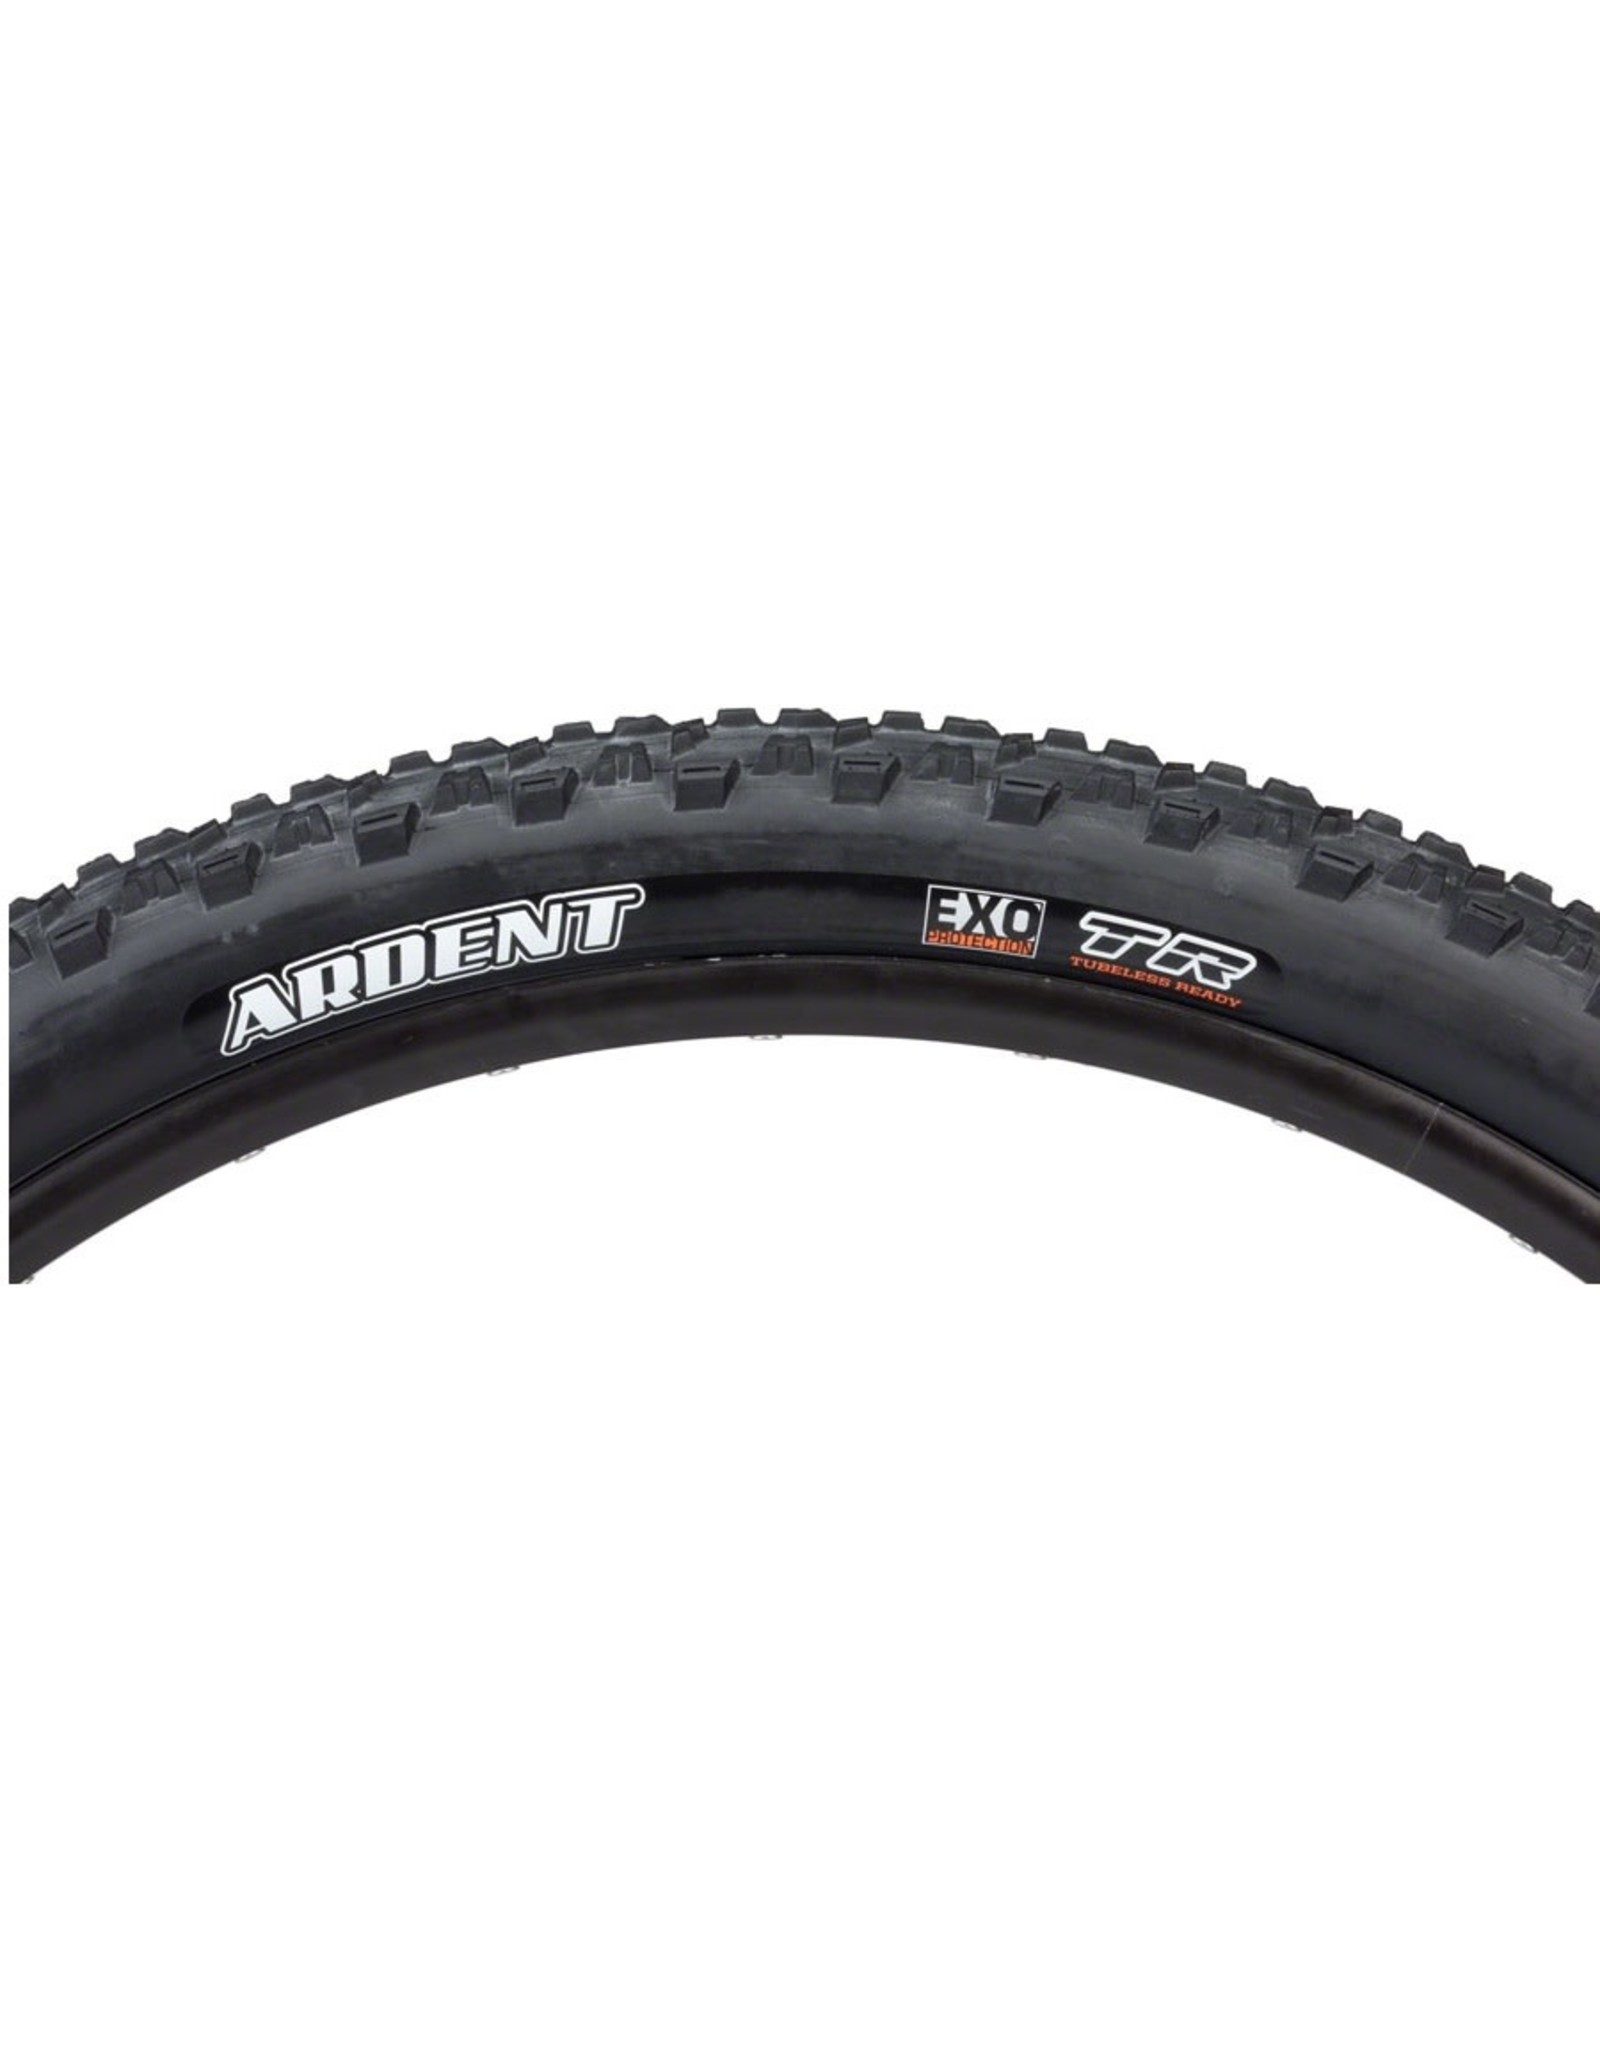 Shop Maxxis Ardent Race 27.5 X 2.20 with great discounts and